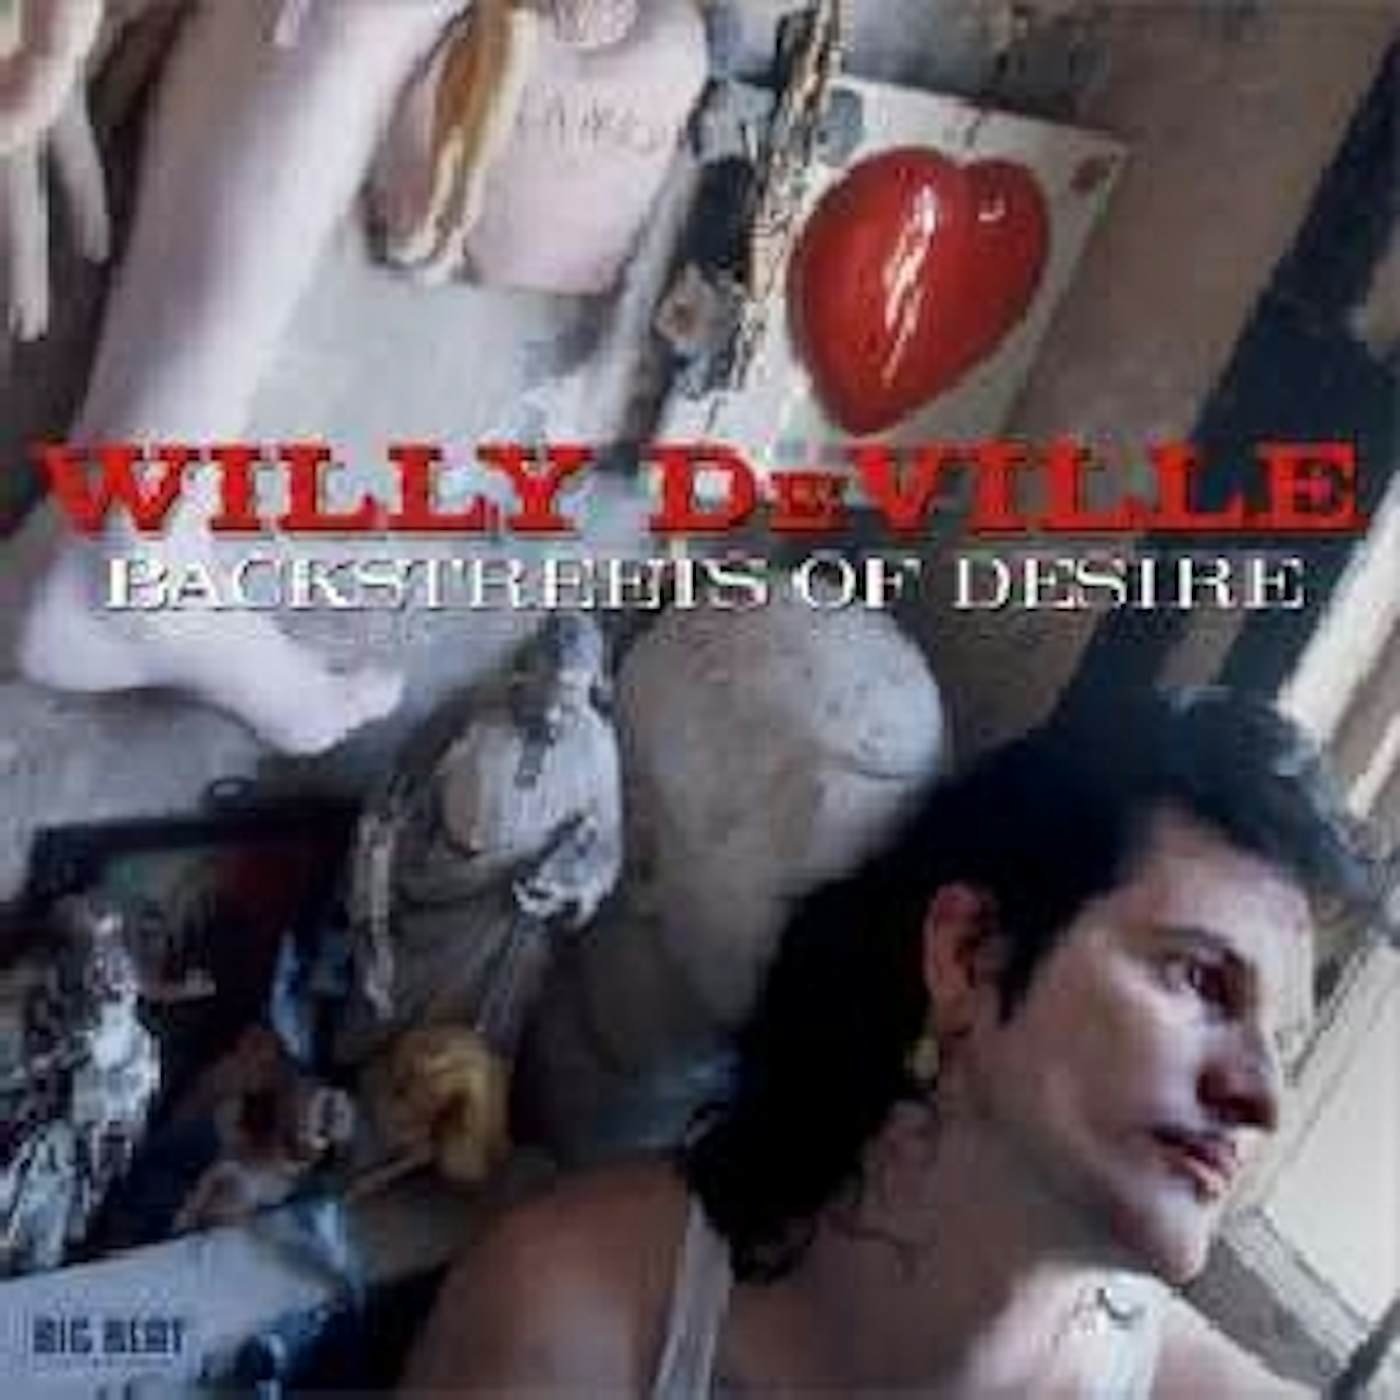 Willy DeVille BACKSTREETS OF DESIRE CD